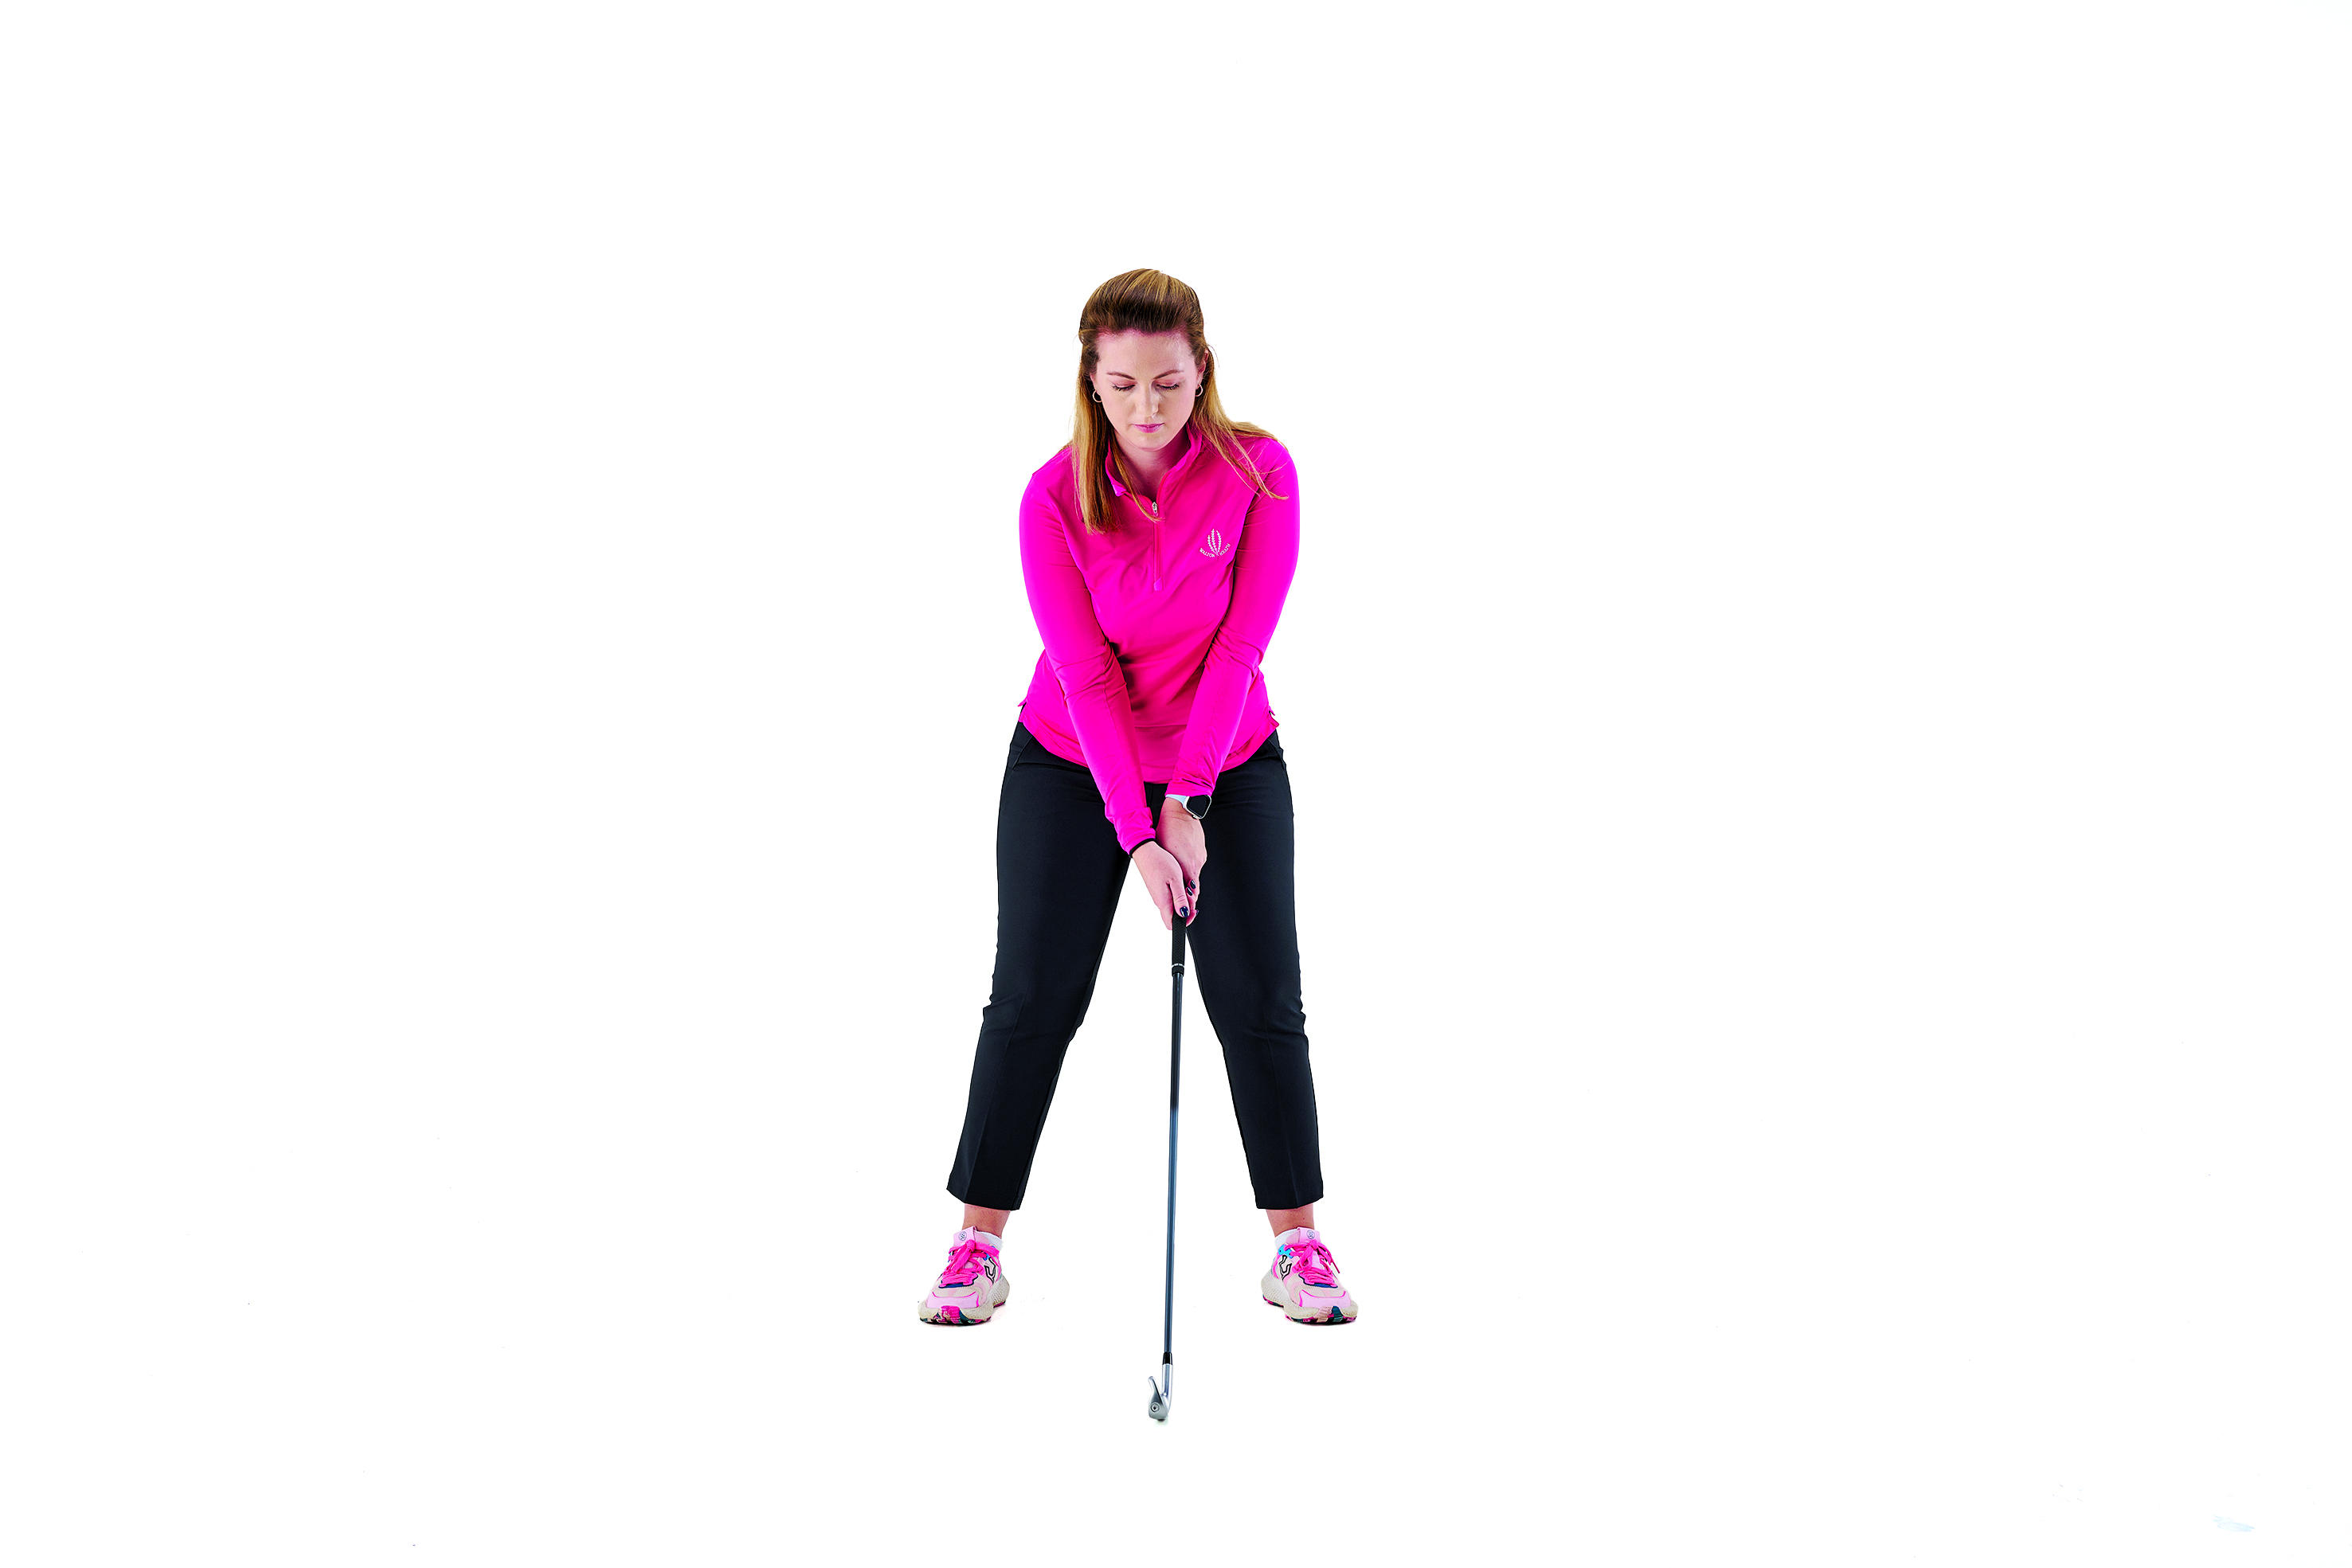 Golf Monthly Top 50 Coach Jo Taylor demonstrating the correct set-up for the golf swing